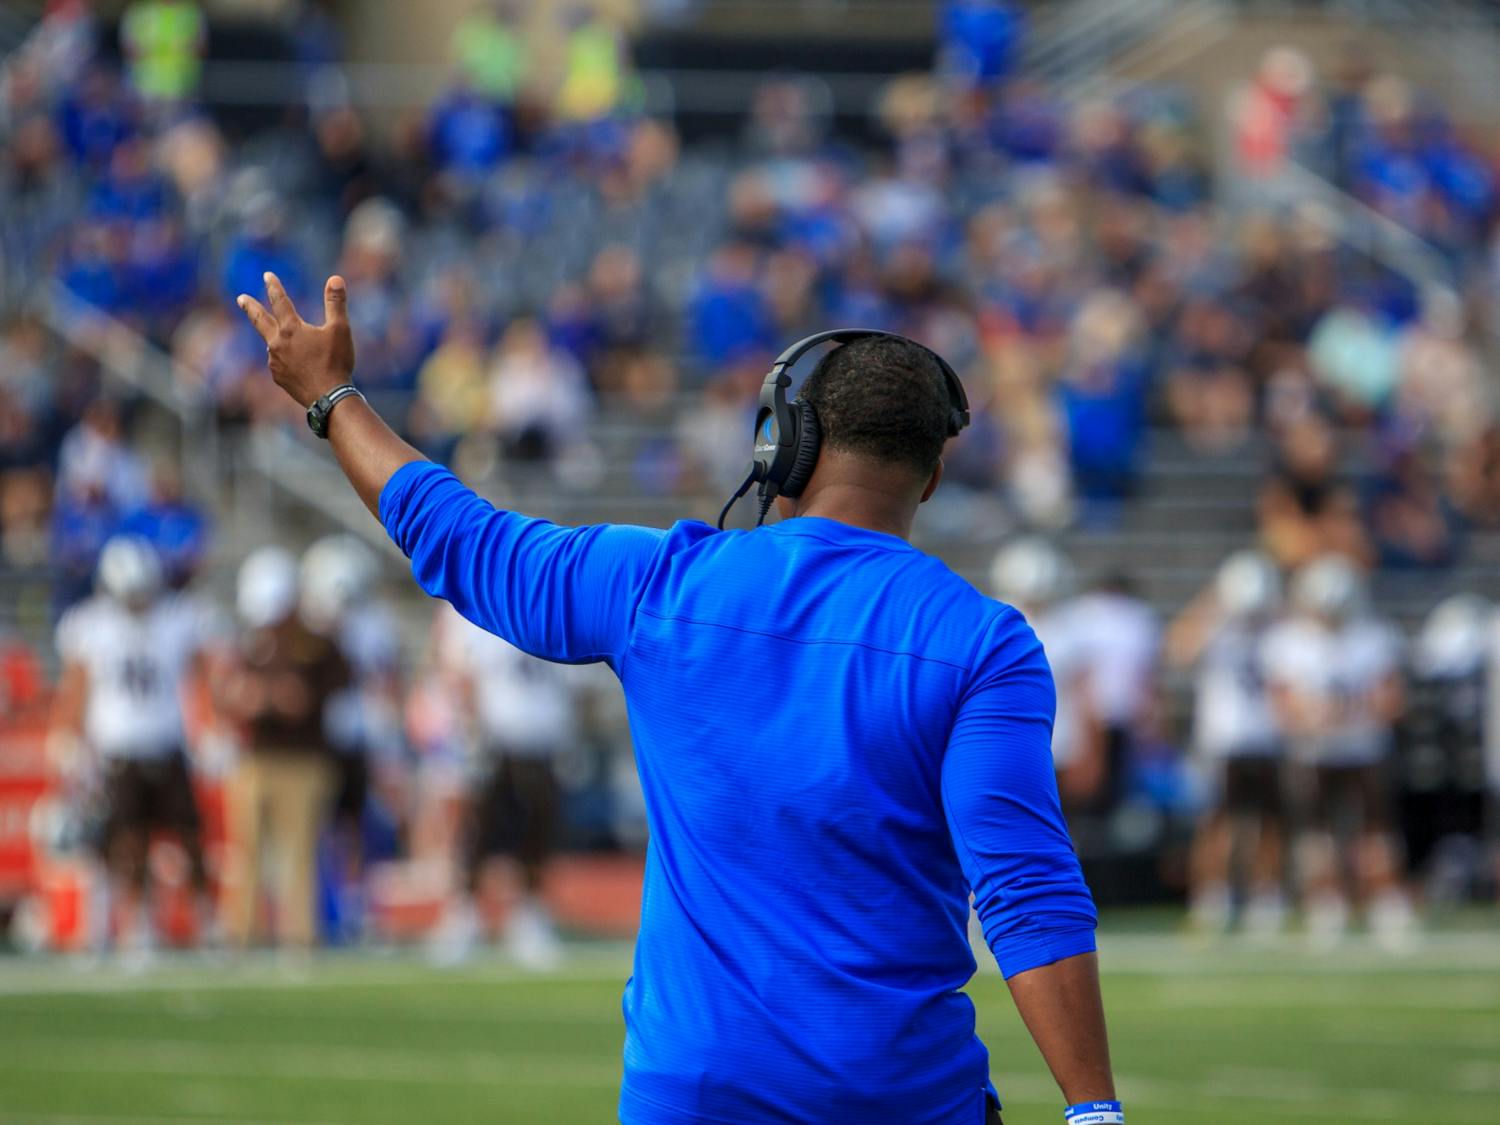 Equipped with a new roster, the UB will test itself on the road against Maryland on Saturday.